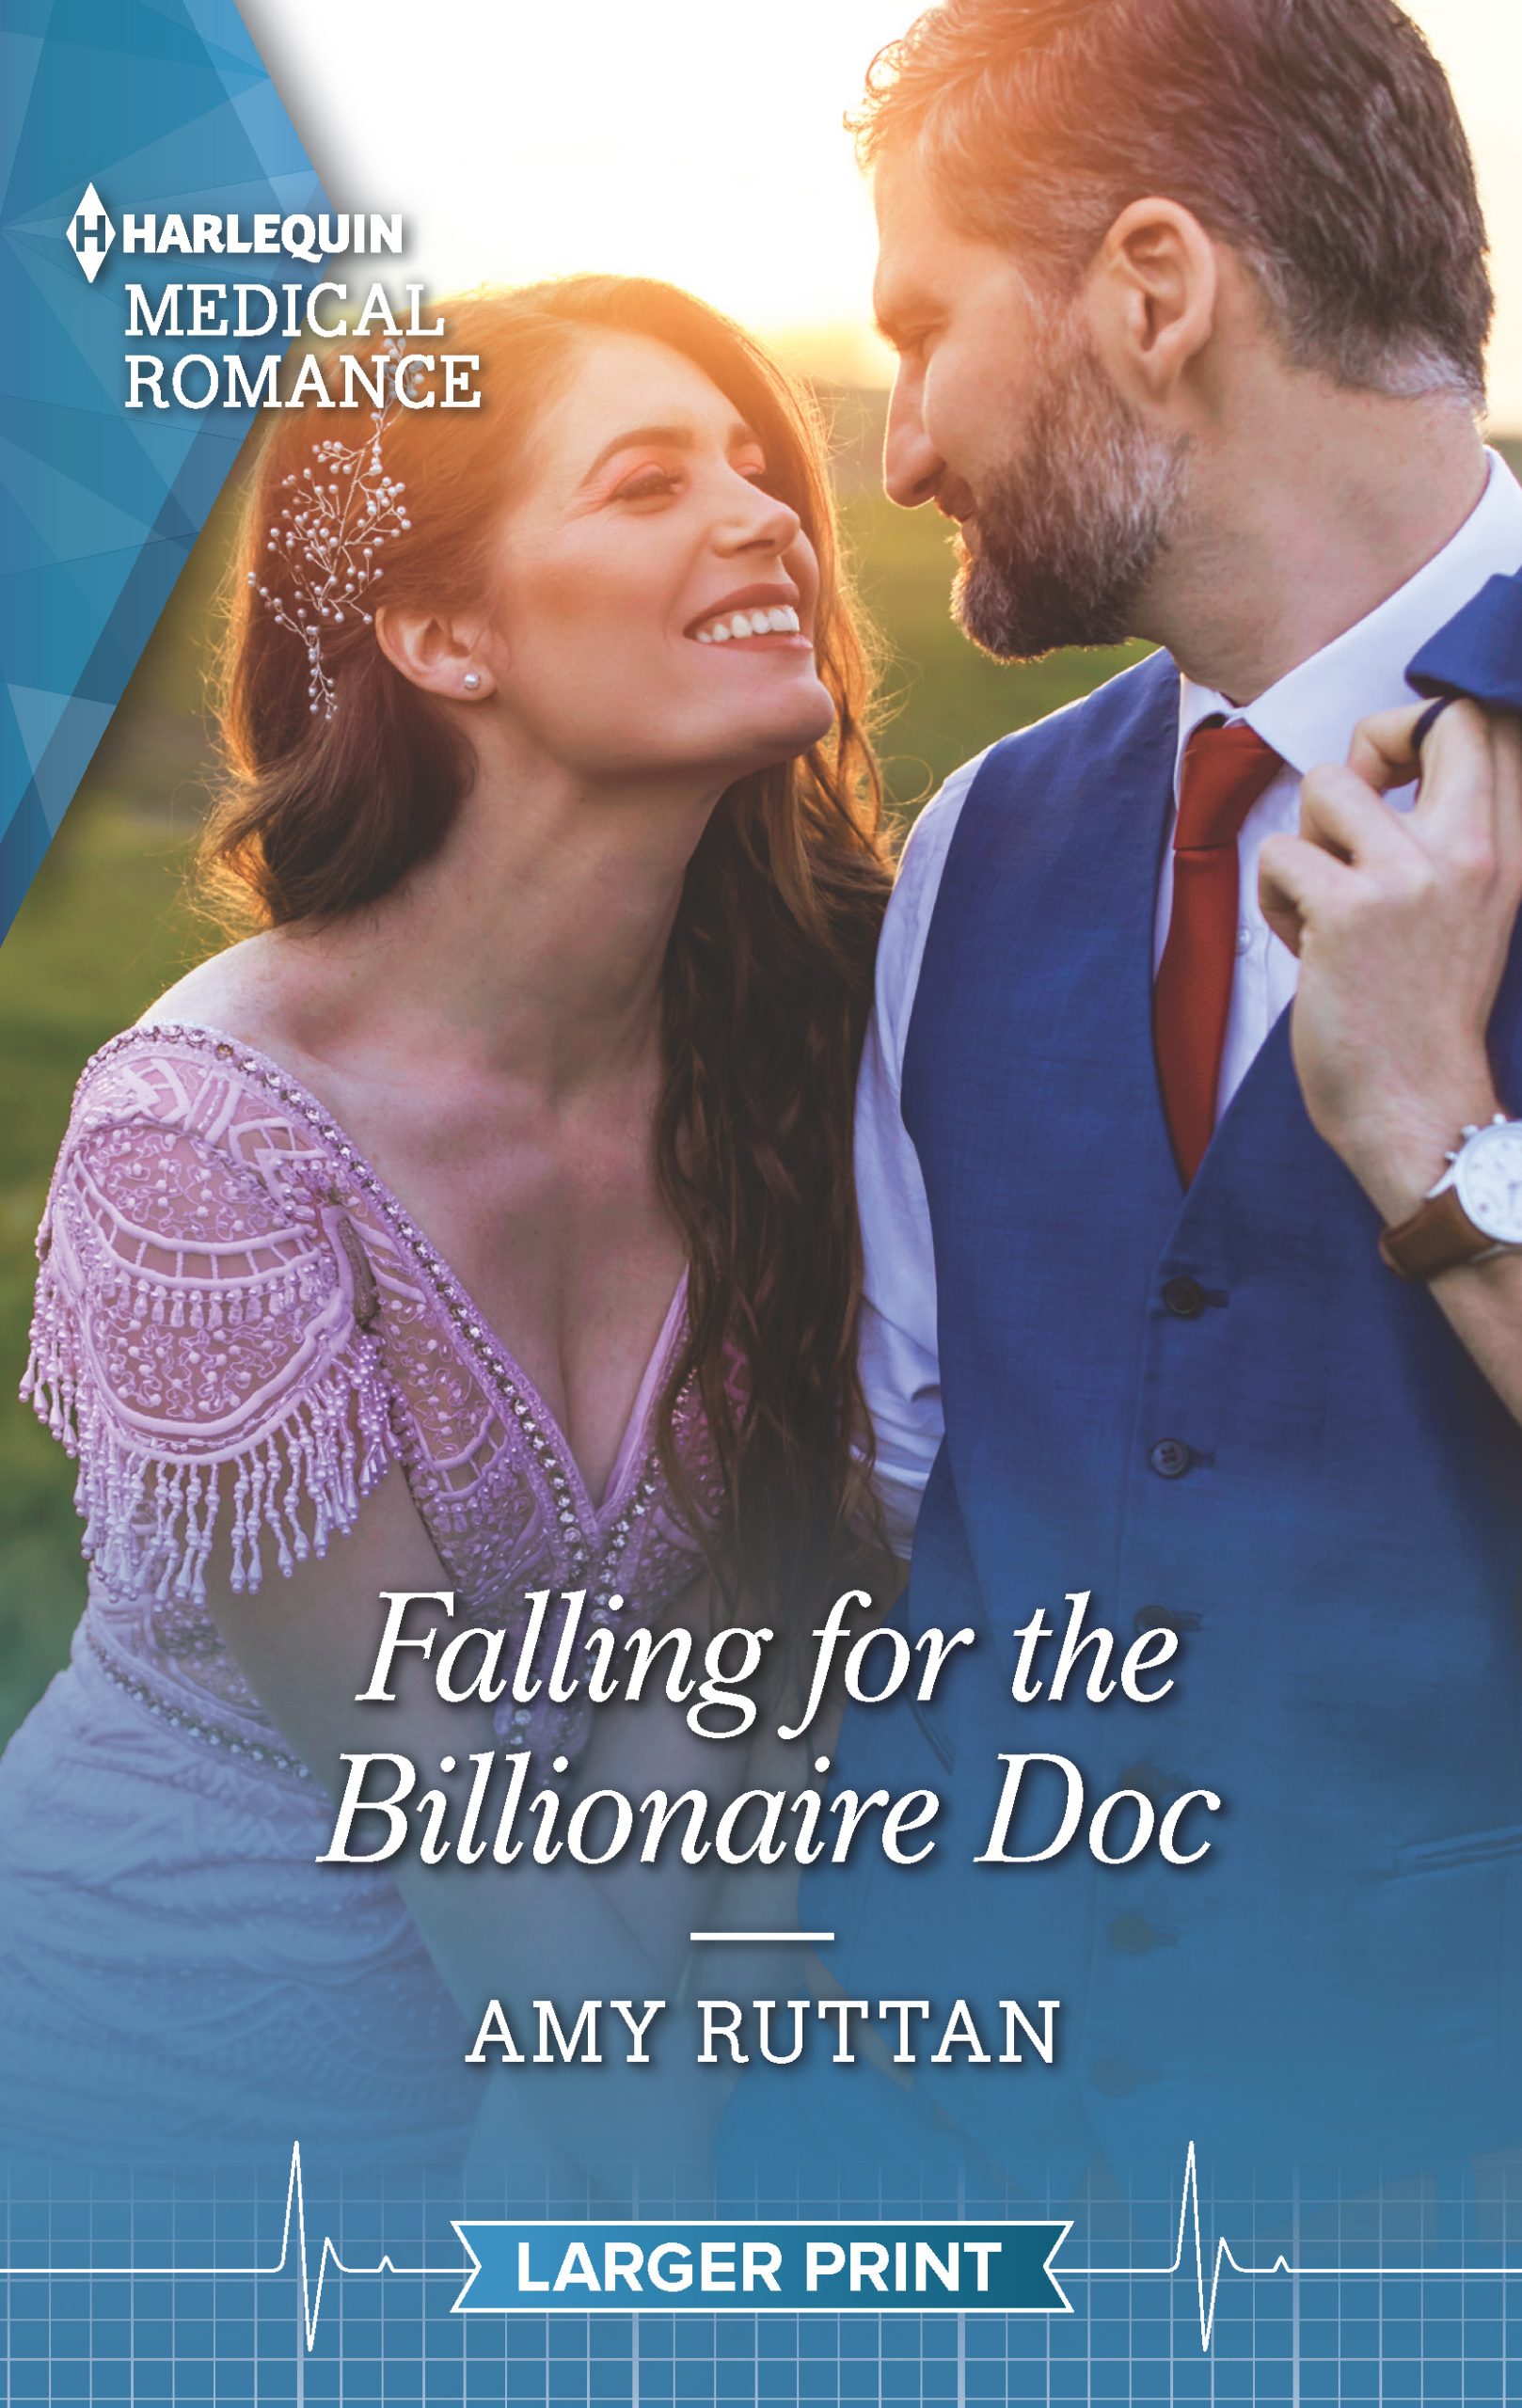 Book Cover for Falling for the Billionaire Doc by Amy Ruttan